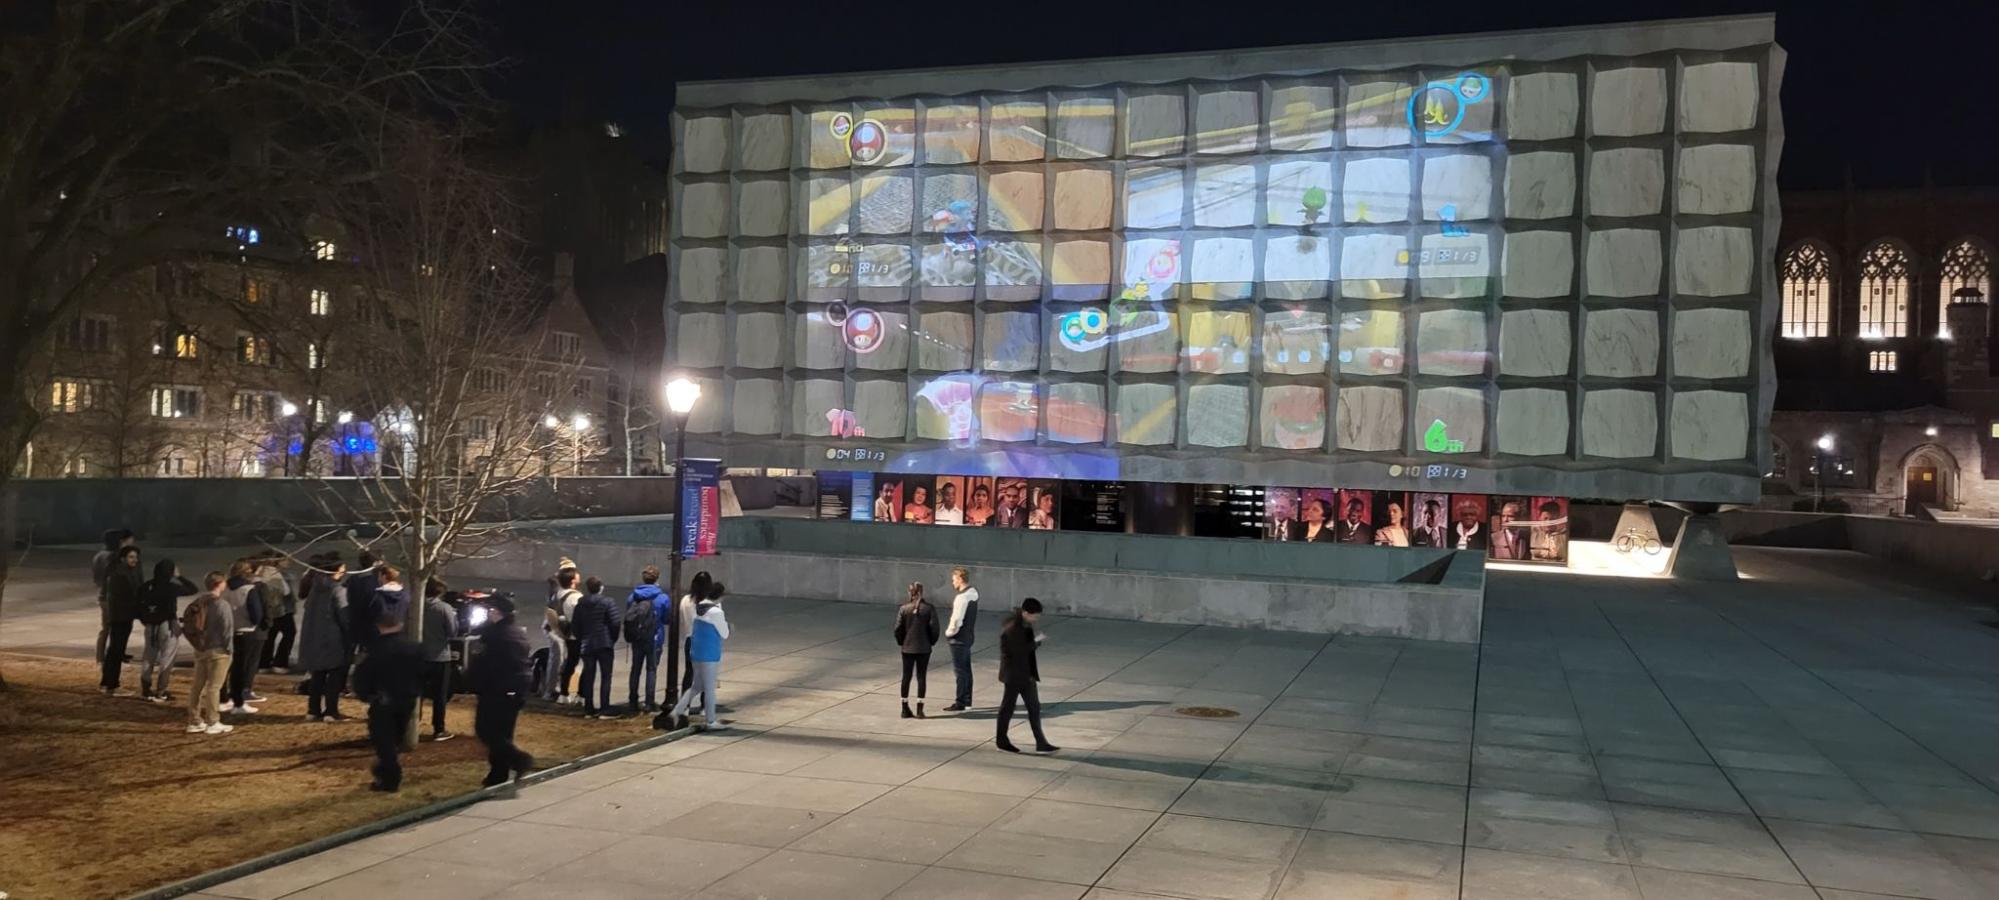 Students project giant Mario Kart game onto Beinecke Library - Yale ...